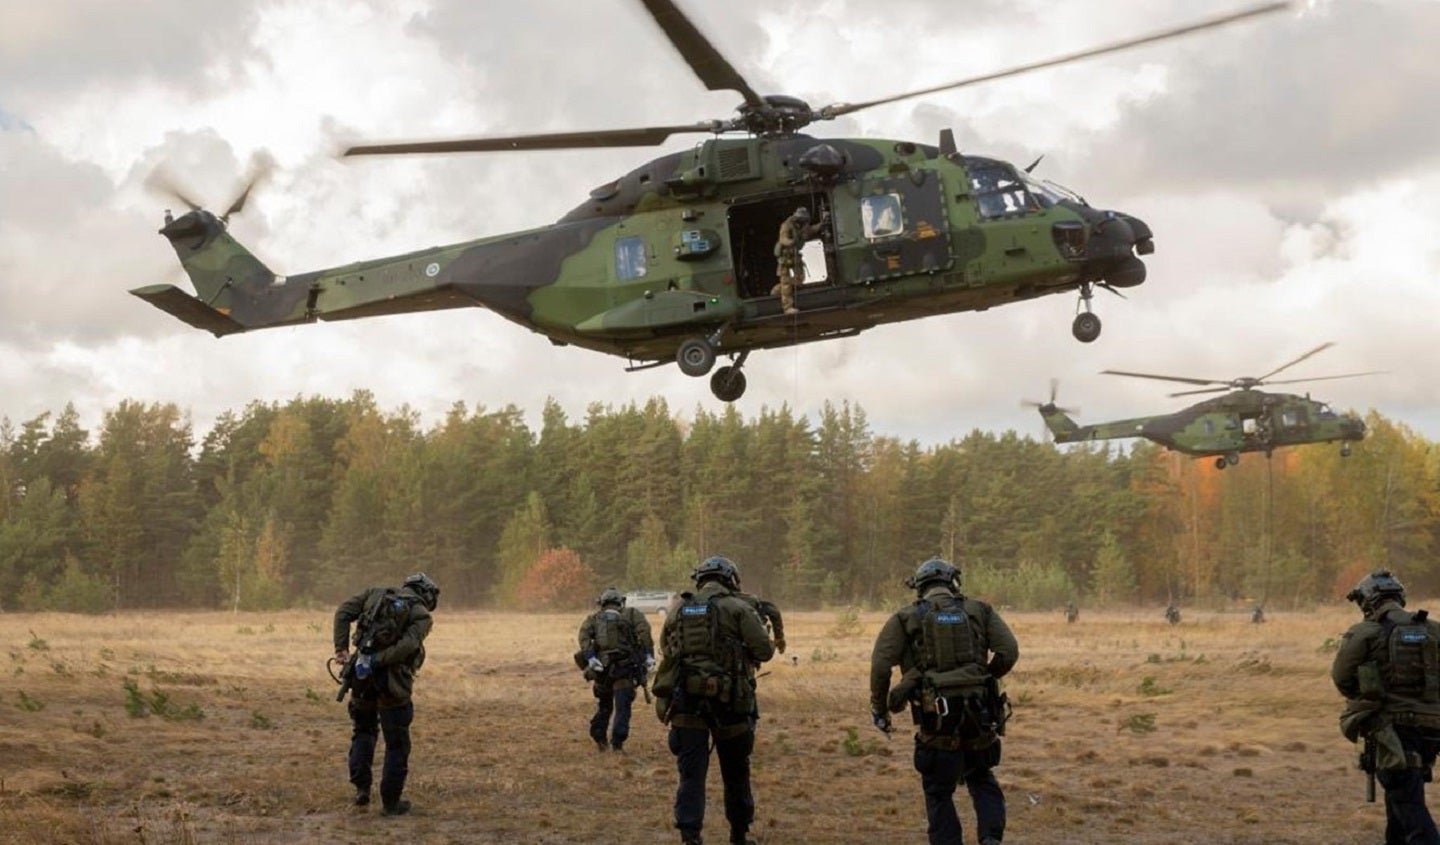 Finland may fast track reservist training for border security